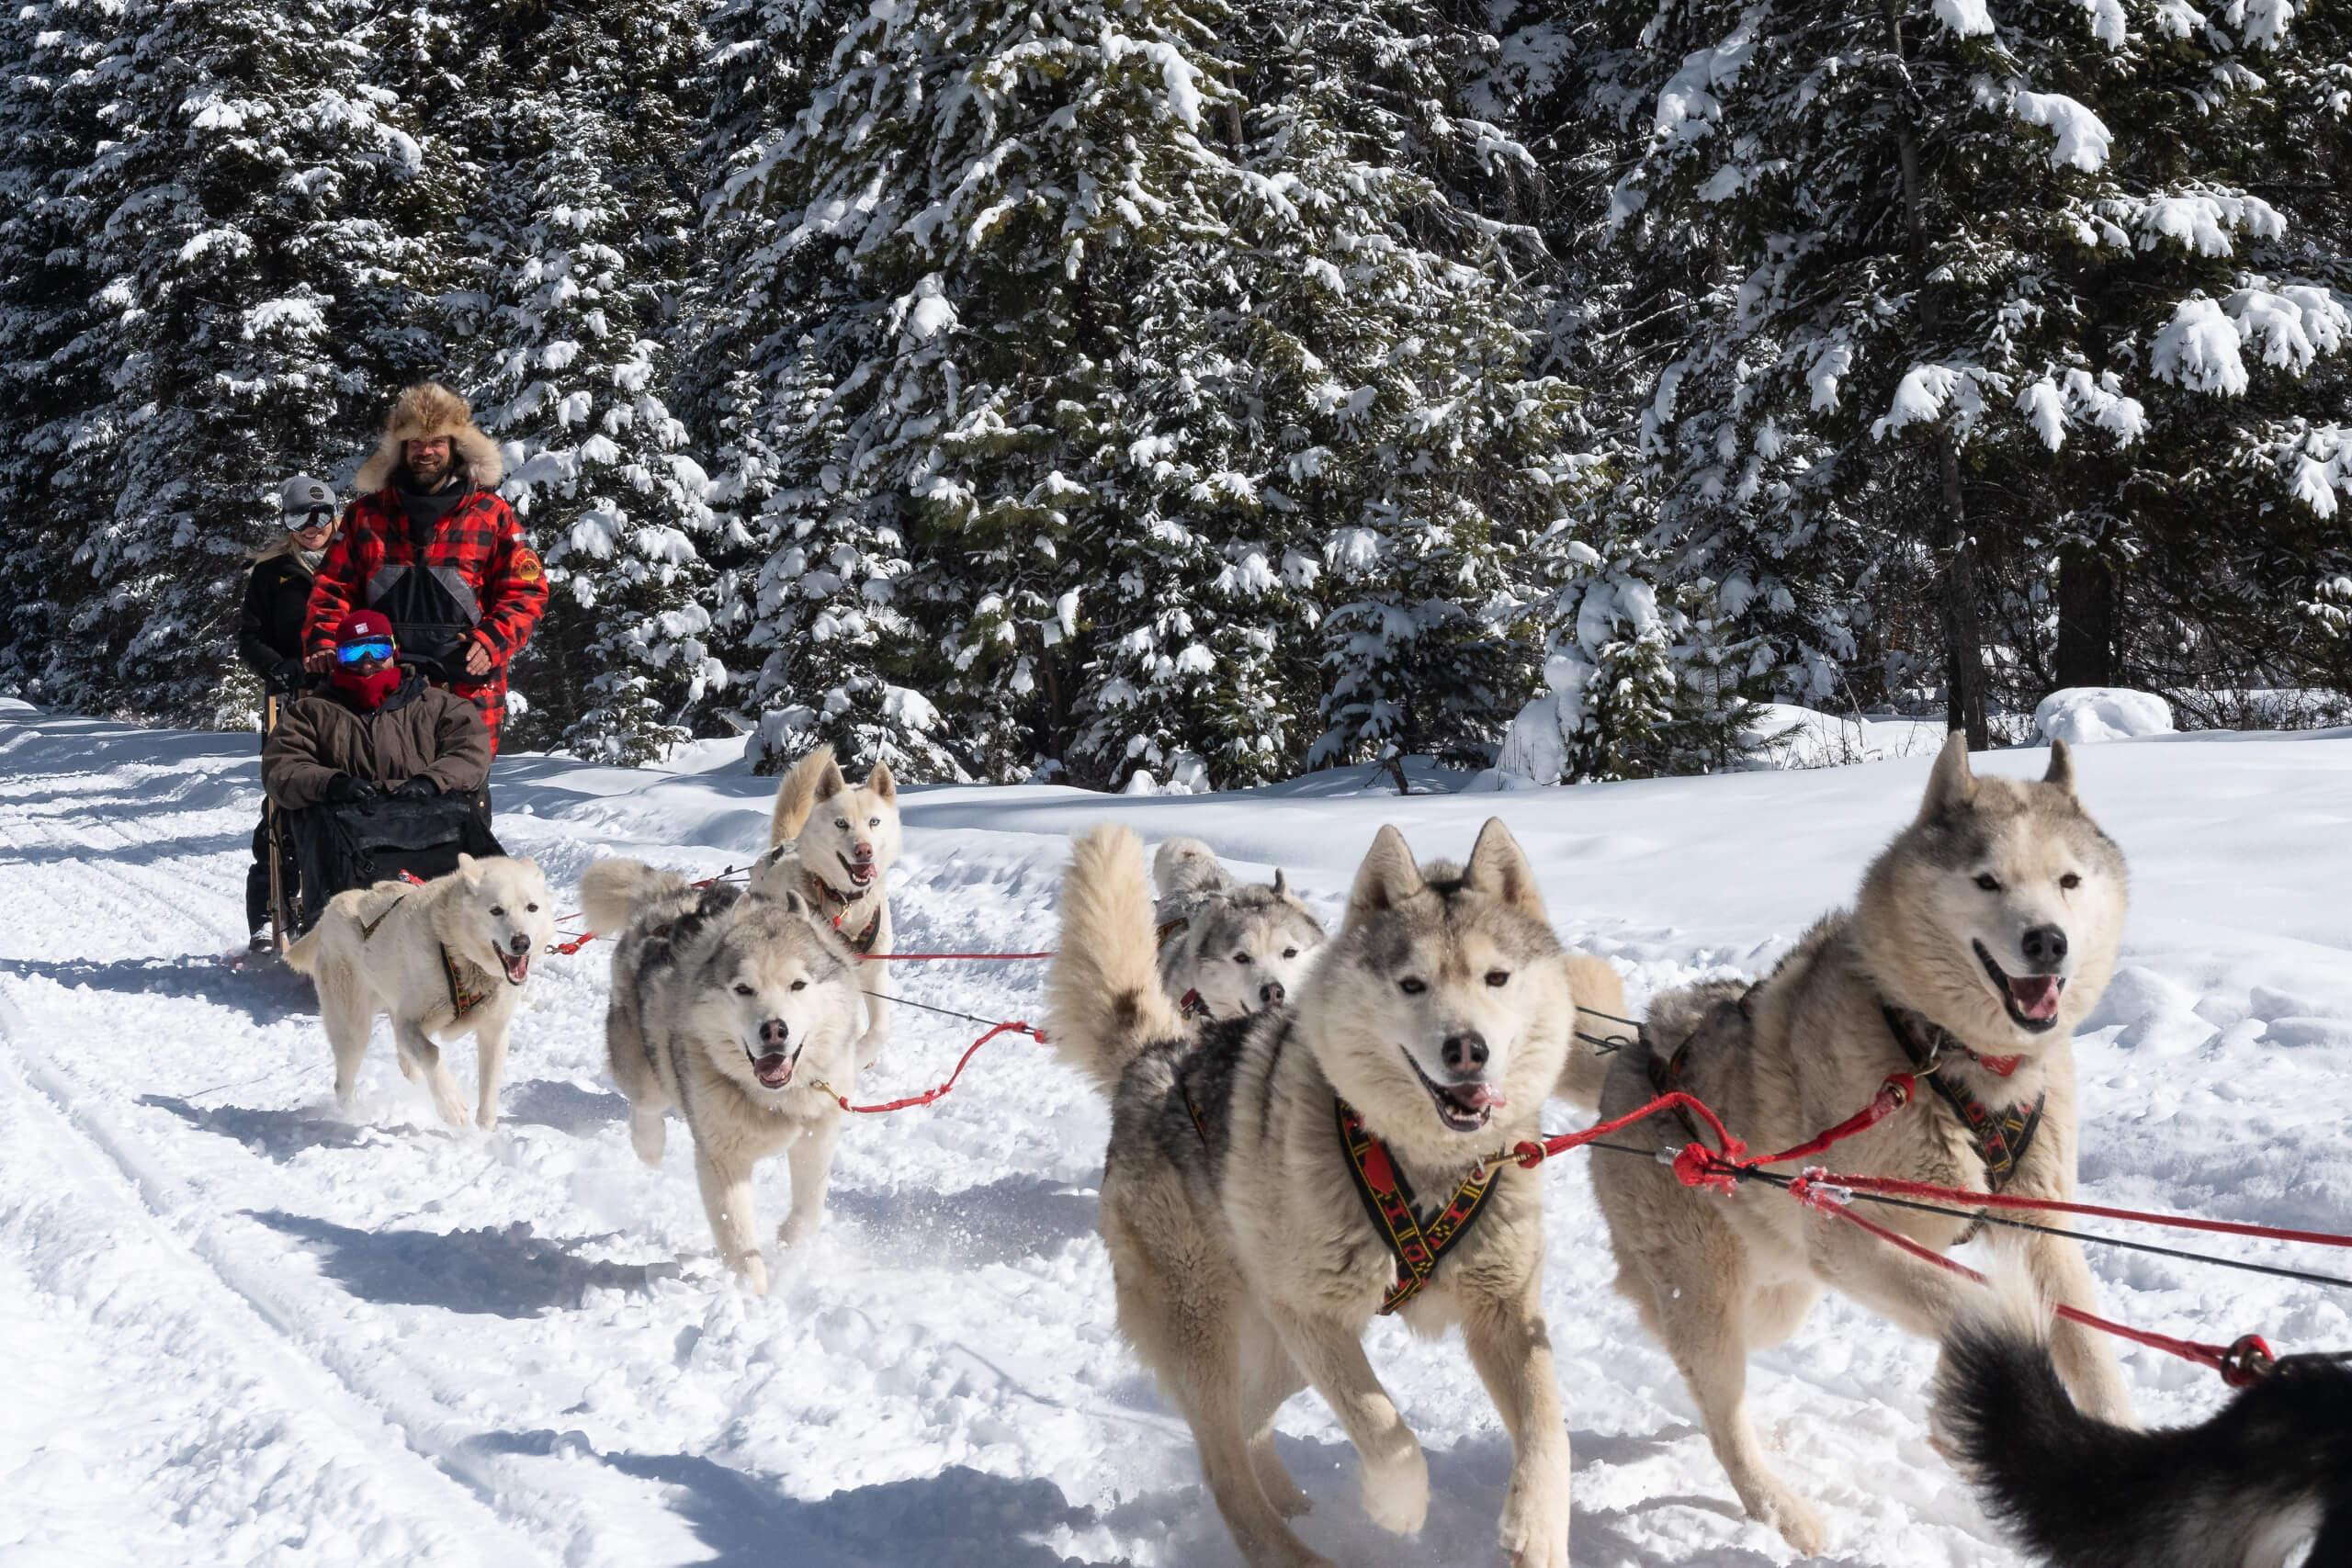 Guests enjoying a dog sled ride through the snow